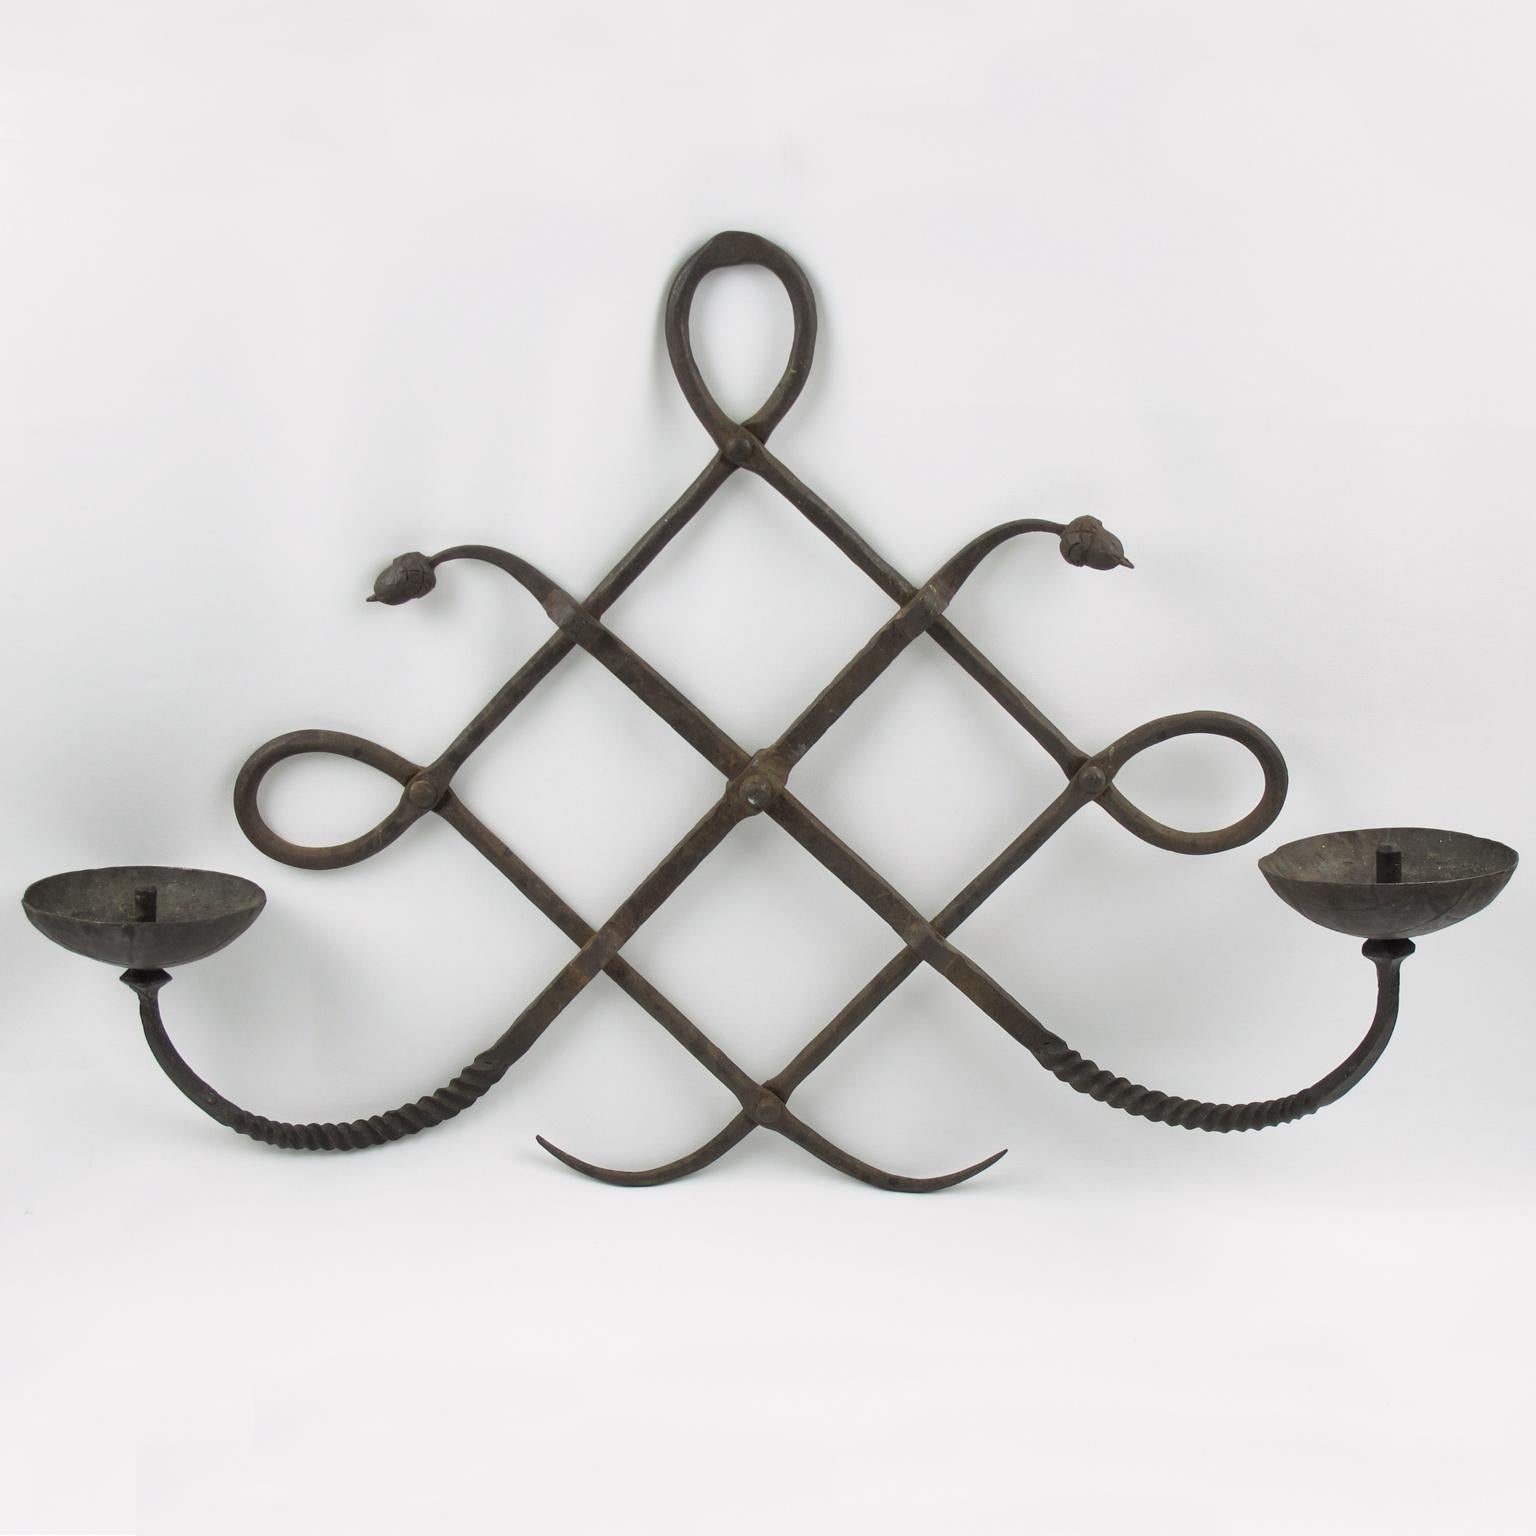 Arts & Crafts Italian 1970s wall candleholder sconce by Modarchitectura. Wrought iron with original patina, refined detailing with rope carving and oak acorn. Candelabra holds two candles. Engraved at the back: 